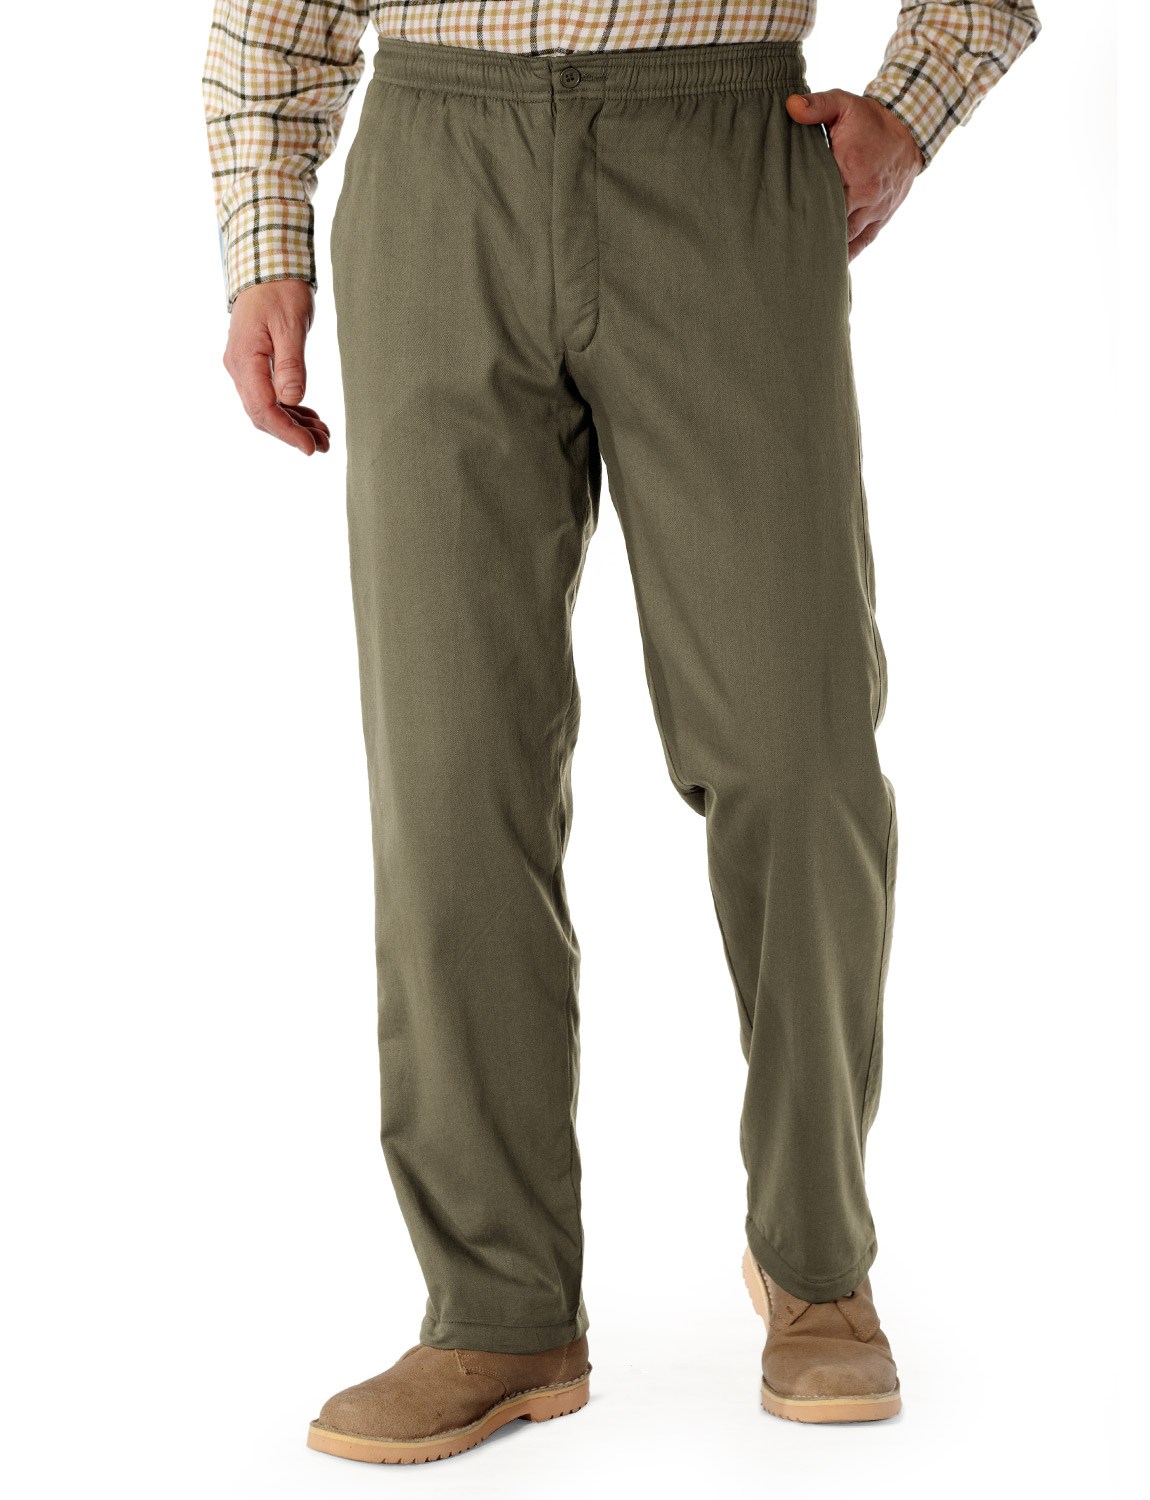 Mens Fleece Lined Elasticated Thermal Draw Cord Trousers | eBay